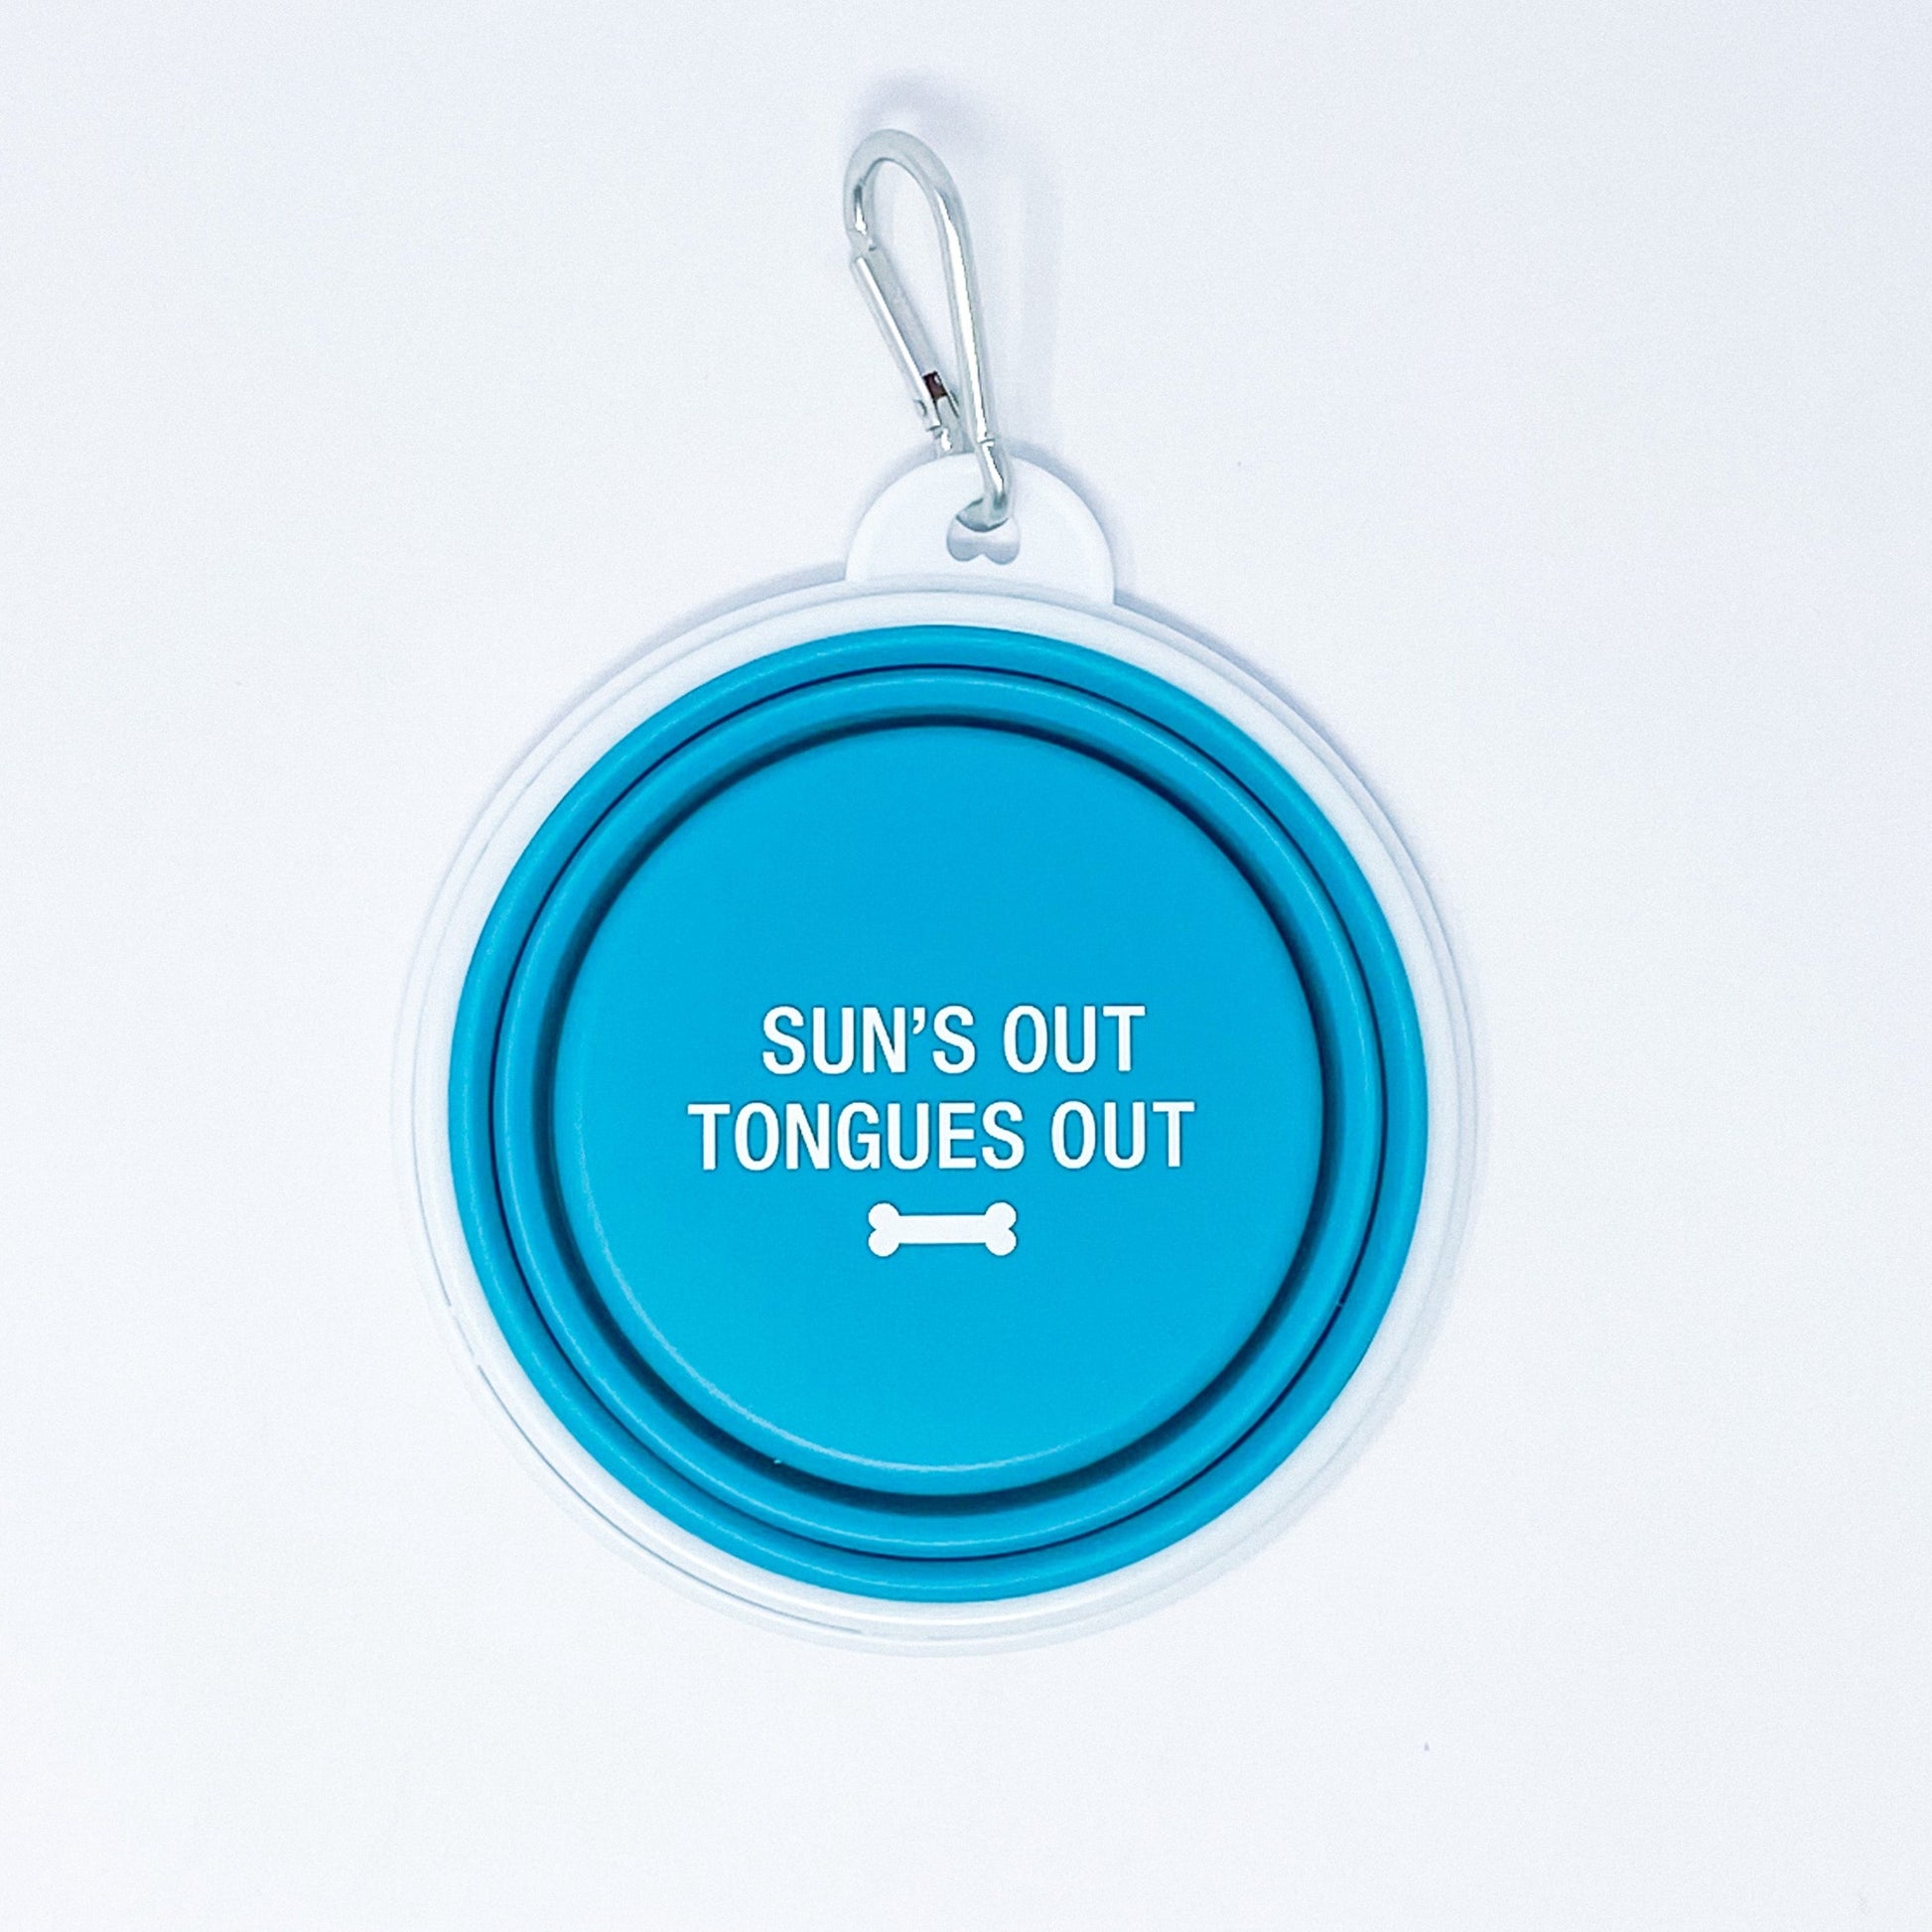 Sun's out tongues out teal blue collapsible travel dog bowl